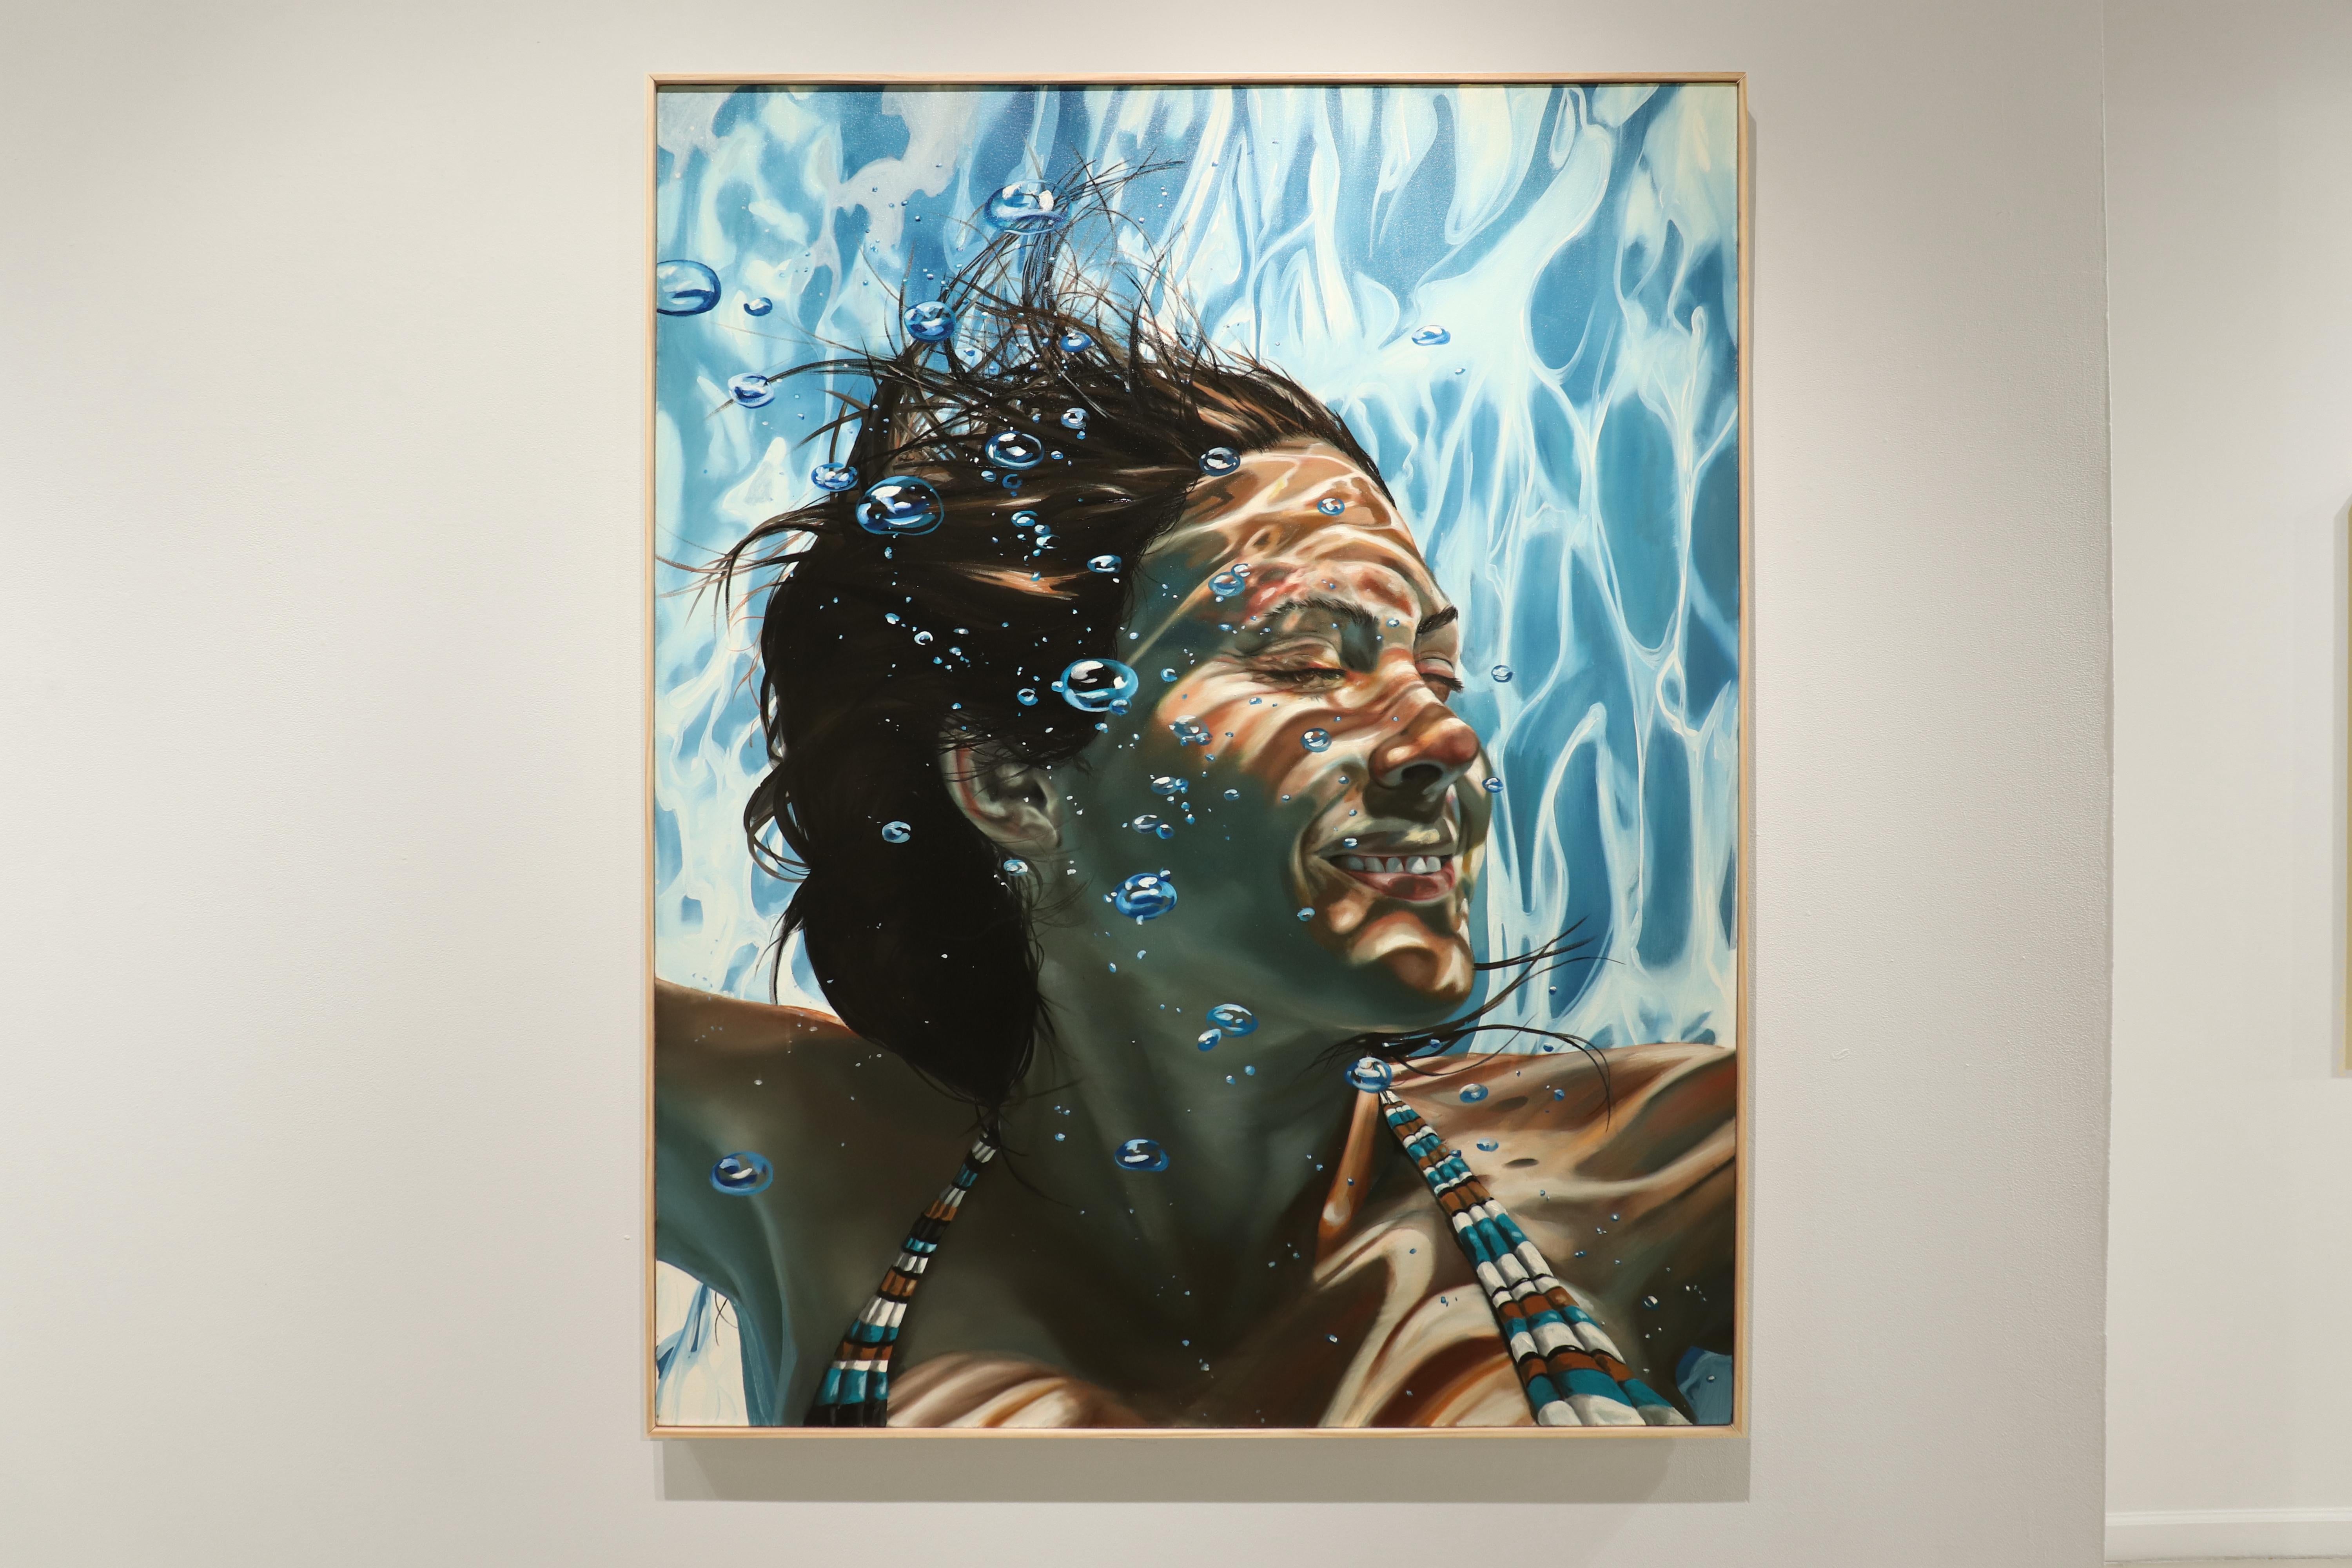 HOW TO BE HAPPY - Underwater Photorealism / Female Swimmer / Large Portrait - Painting by Eric Zener